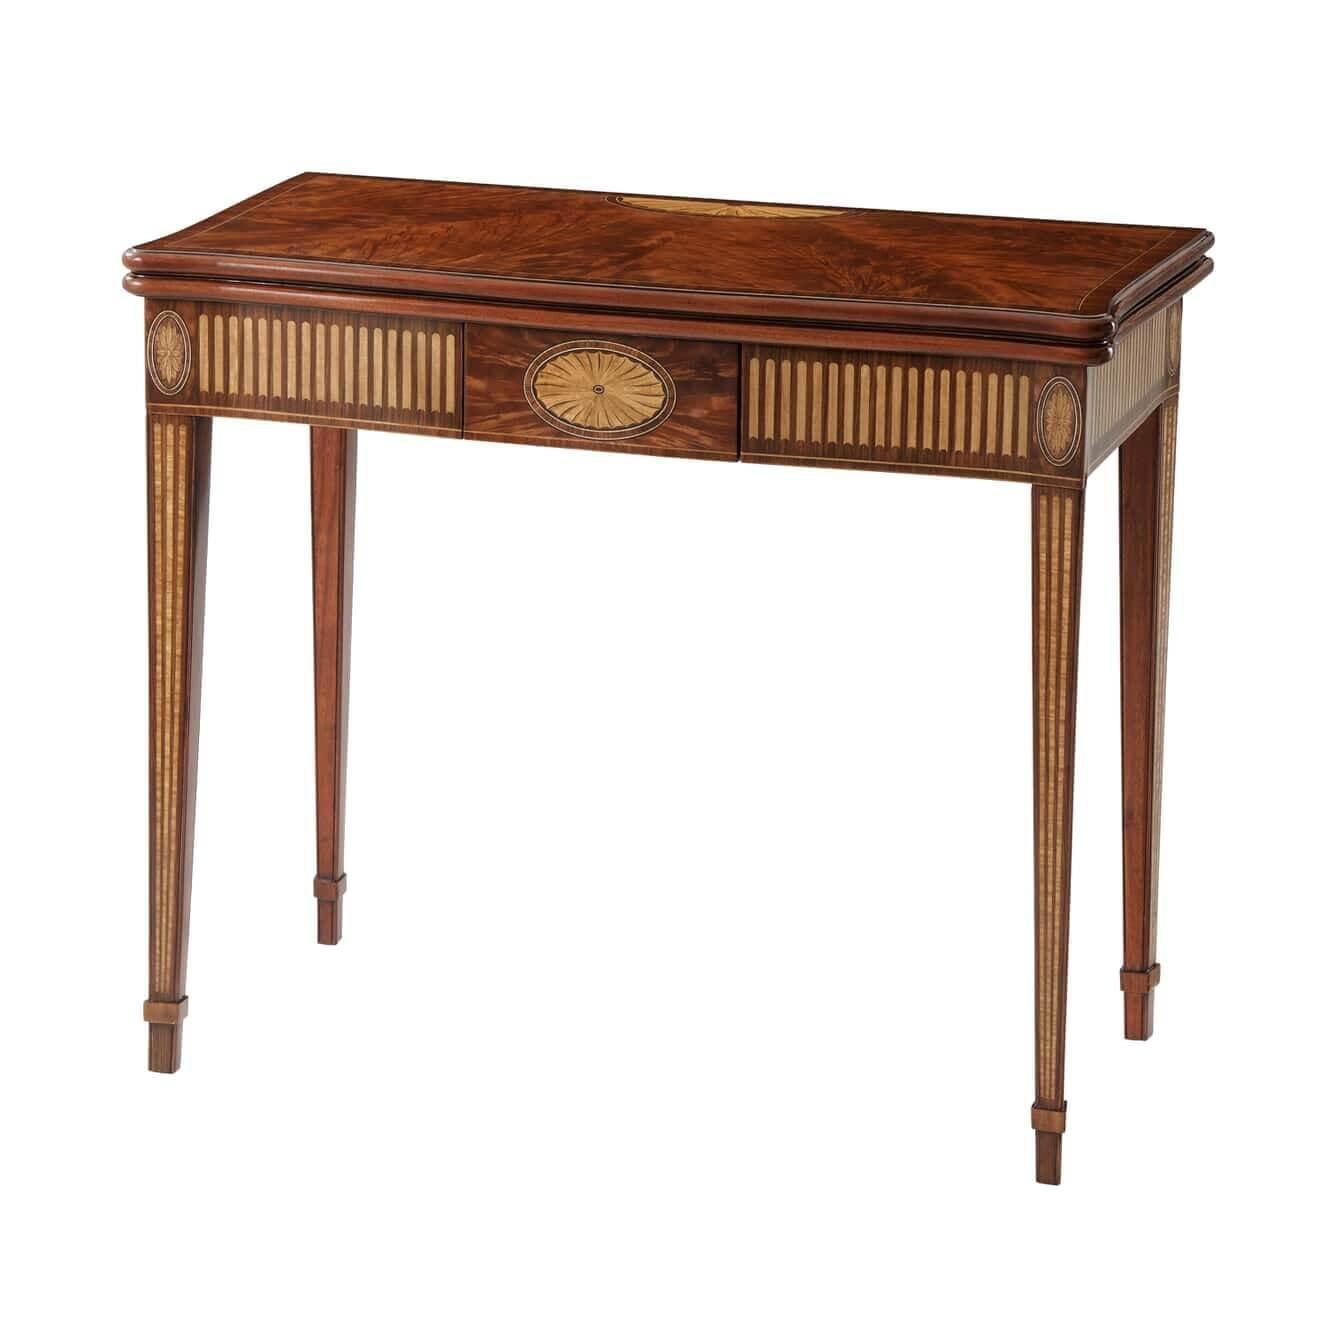 A fine George III Hepplewhite style flame mahogany and parquetry veneered accordion action games table, the serpentine molded edge top crossbanded in Morado and fine stringing, opening to reveal a leather inlaid and gilt-tooled playing surface,